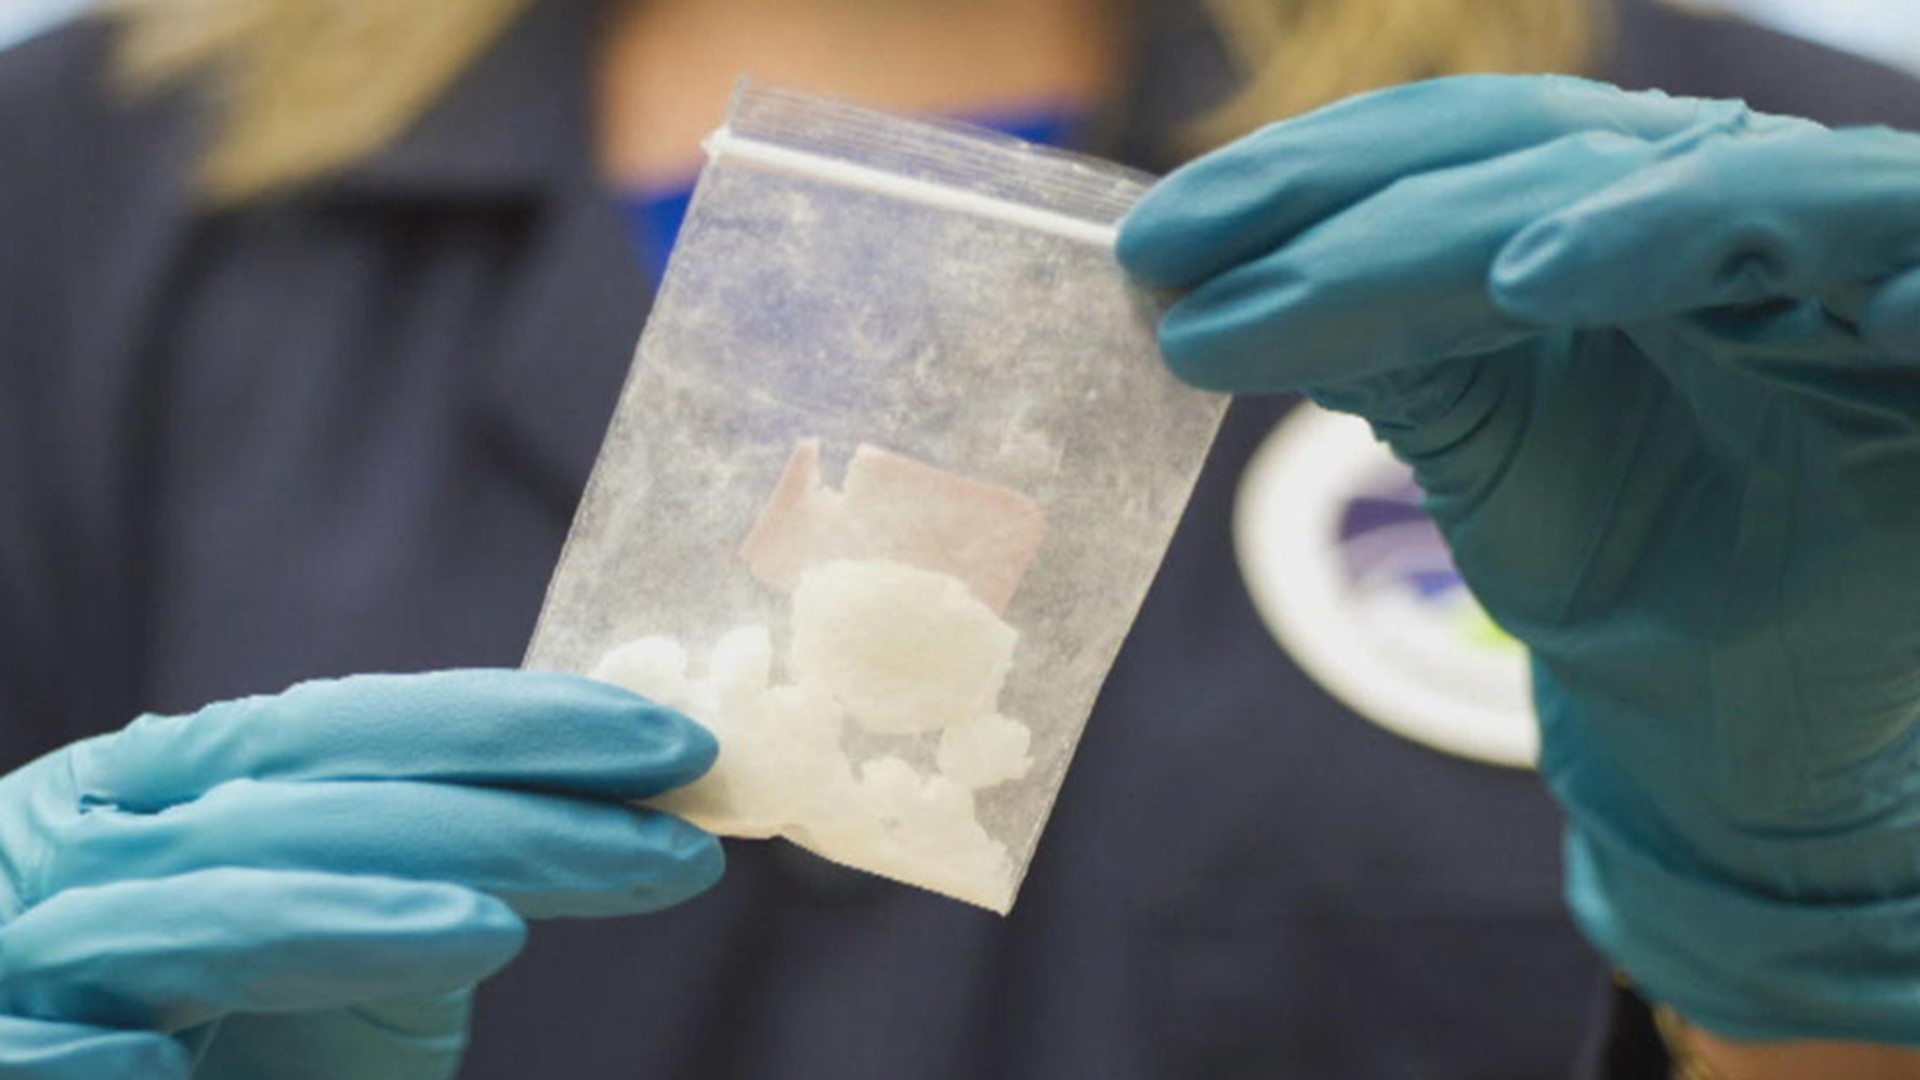 Fentanyl is a highly addictive man-made opioid that is 50 times more potent than heroin and is considered the deadliest drug threat facing the U.S.